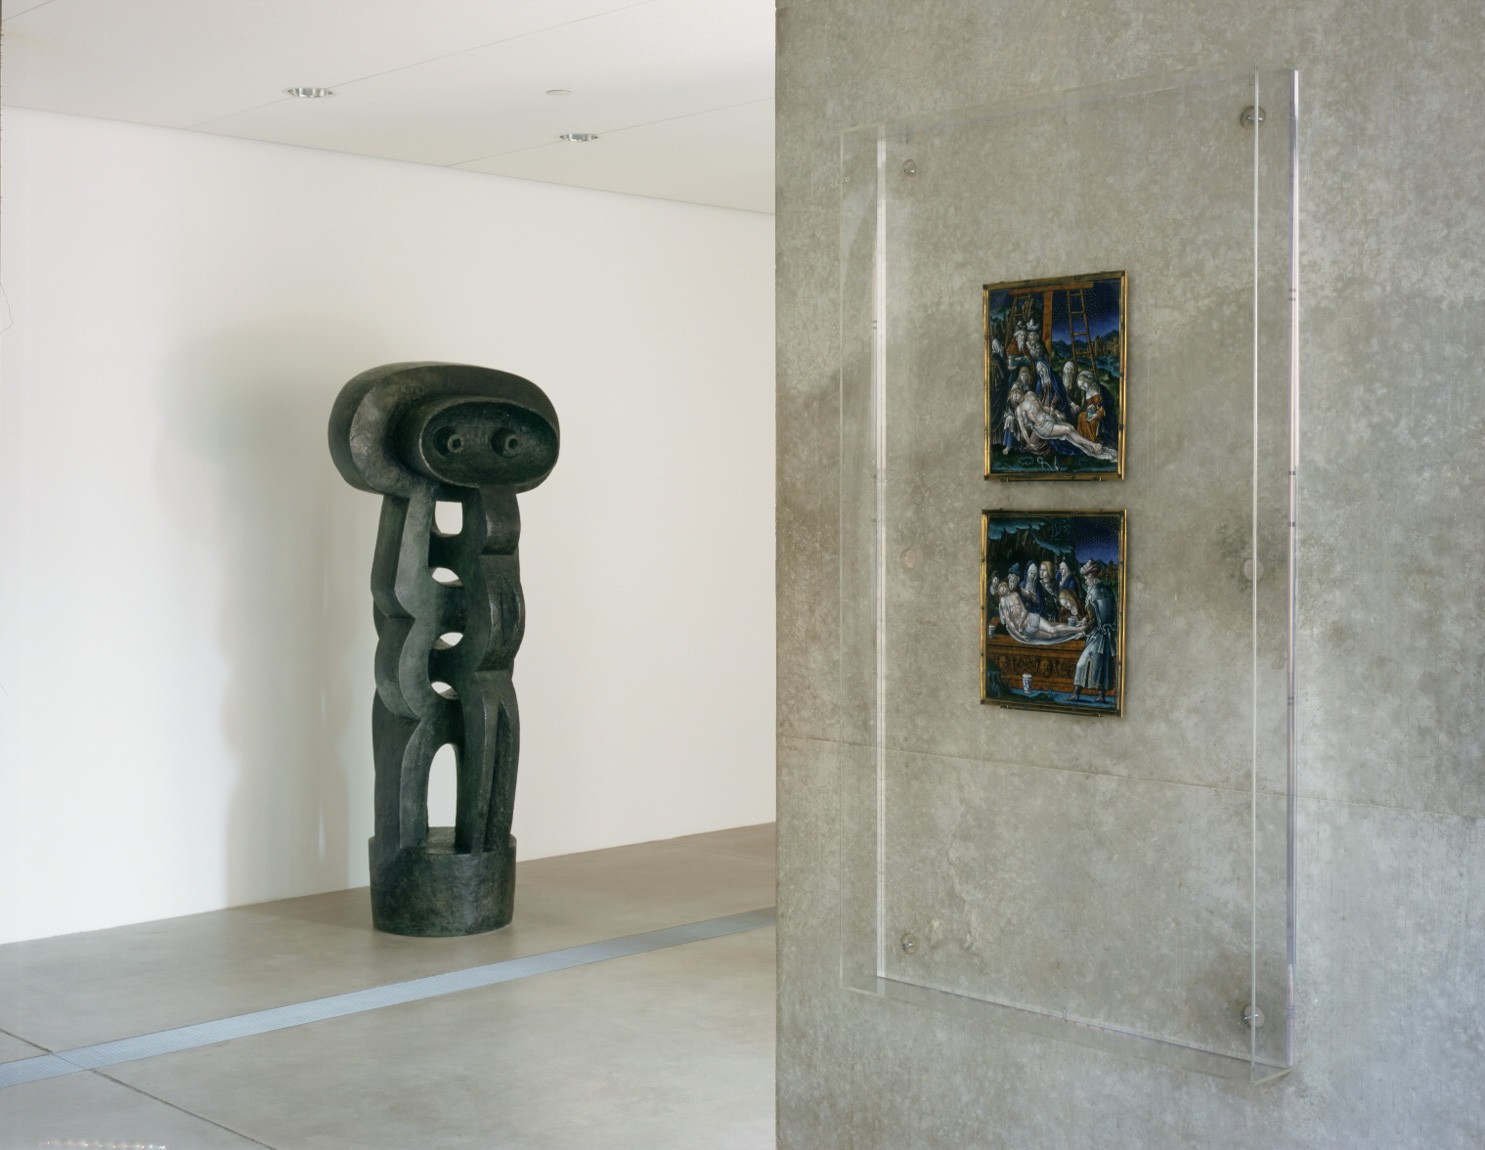 A view of Lipchitz's towering black "Figure," which stares at the entrance doors, and Pierre Reymond's "The Deposition of Christ and The Entombment of Christ," encased in glass on the wall, in the Entrance Gallery.